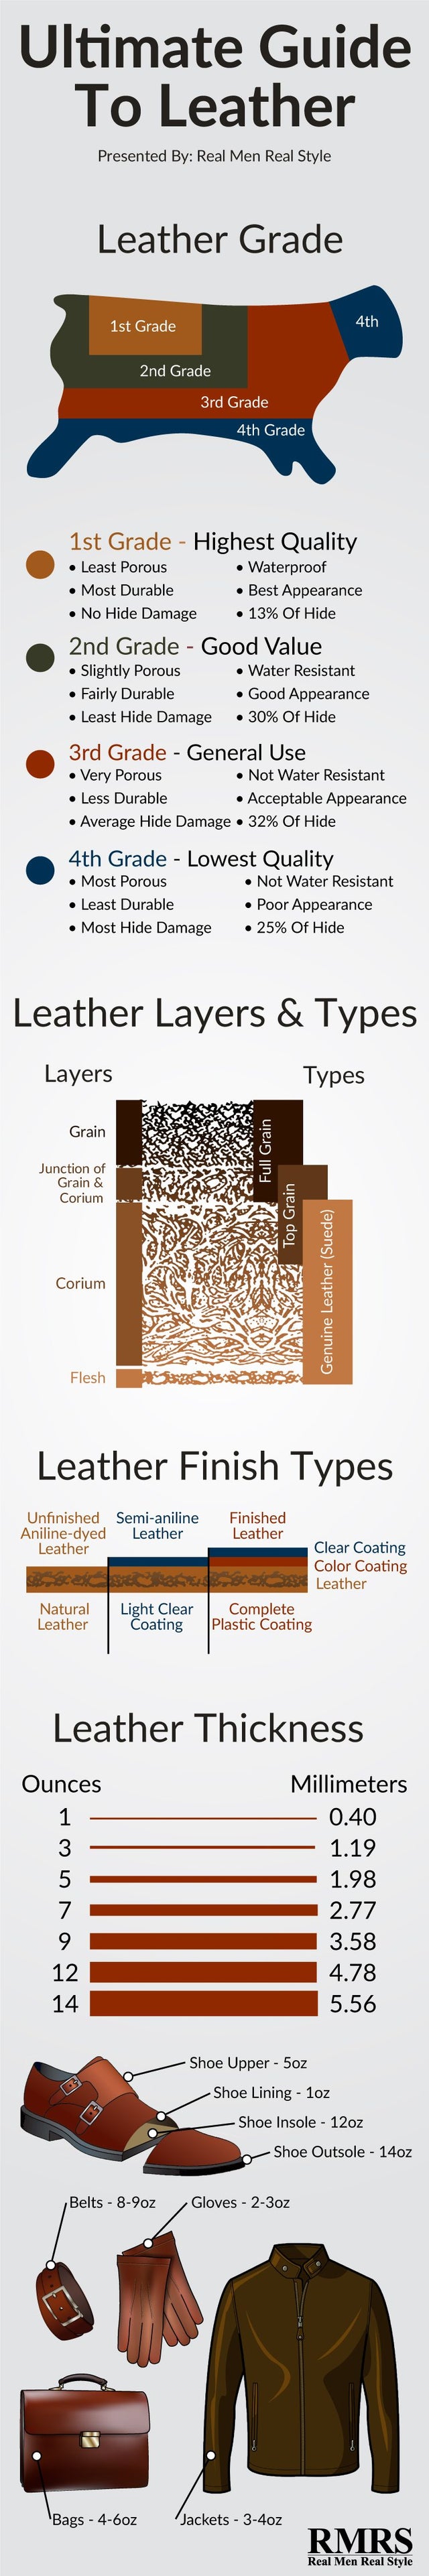 genuine leather infographic - Ultimate Guide To Leather Presented By Real Men Real Style Leather Grade 1st Grade 4th 2nd Grade 3rd Grade 4th Grade 1st Grade Highest Quality Least Porous Waterproof Most Durable Best Appearance No Hide Damage 13% Of Hide 2n